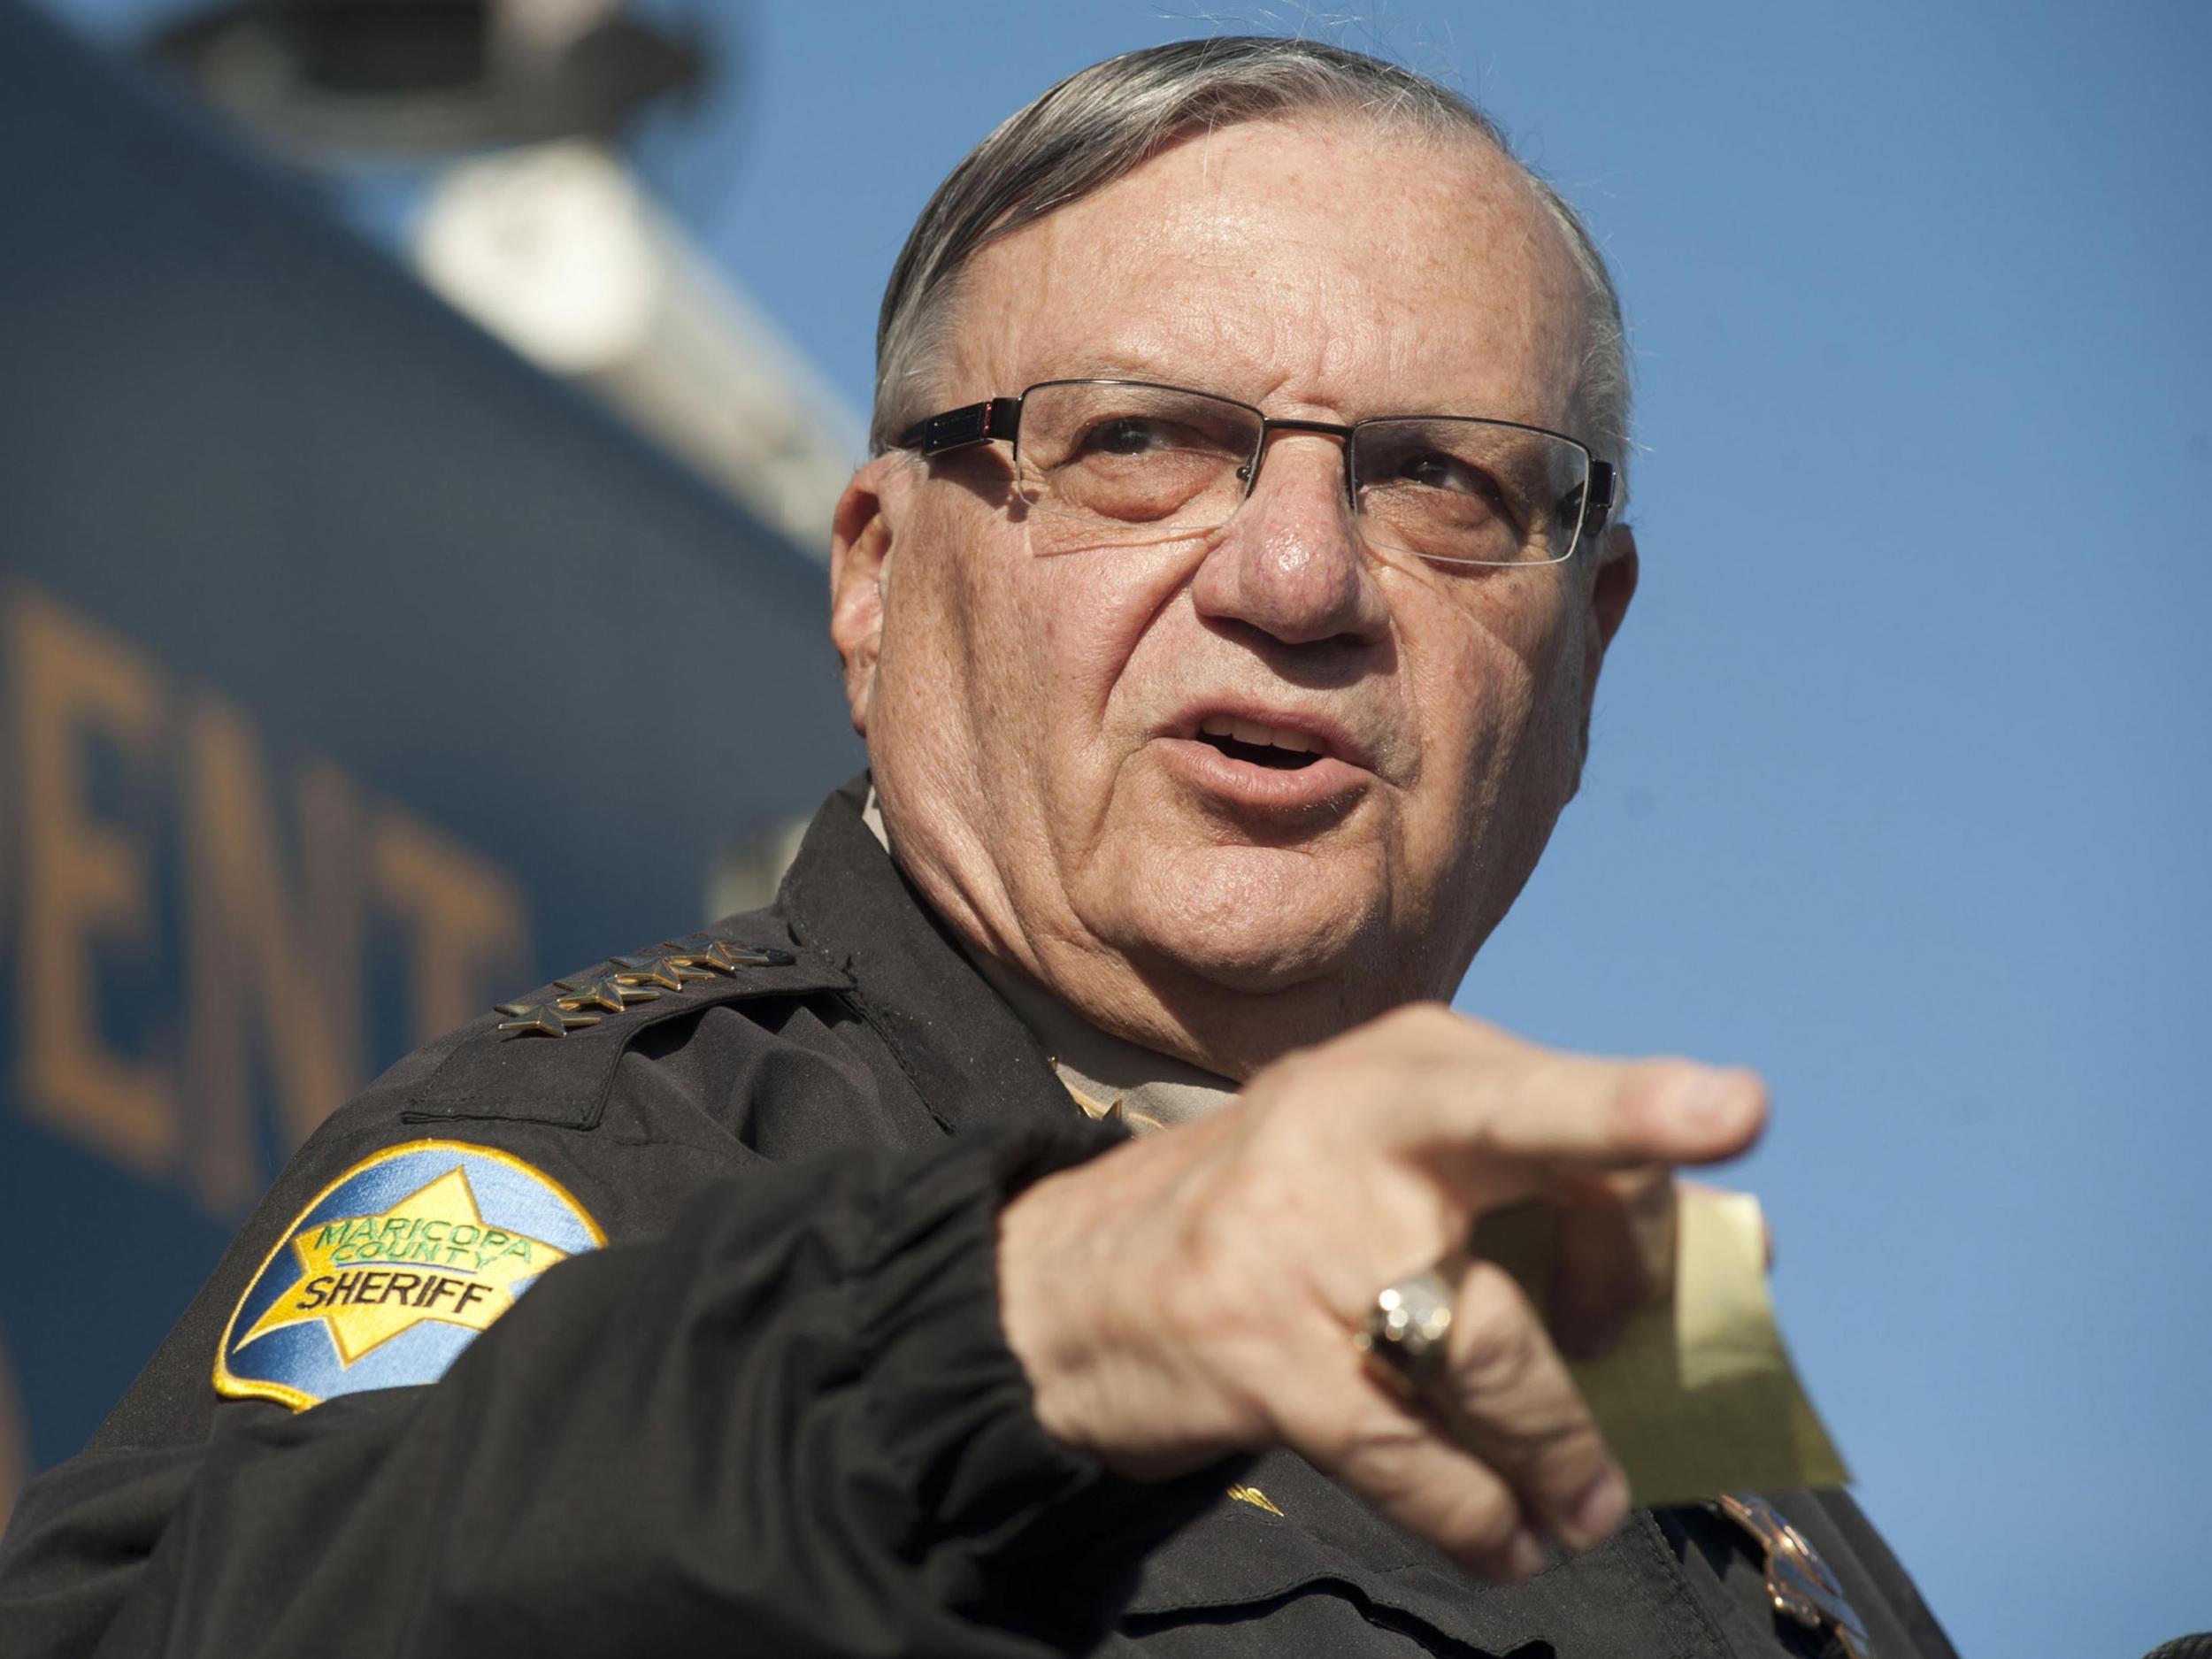 Arpaio has been convicted for criminal contempt of court, and is awaiting sentencing